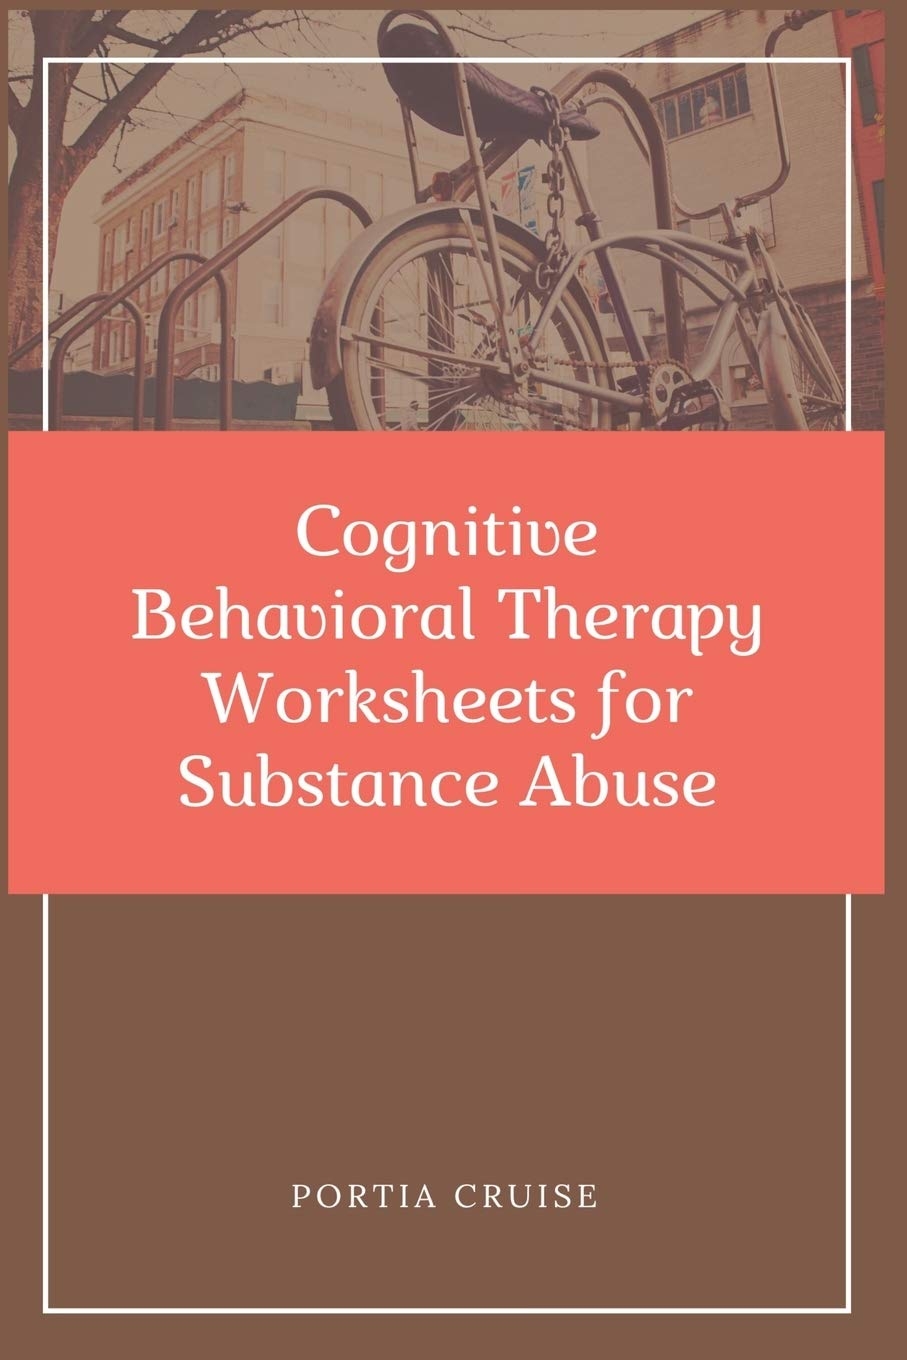 Cognitive Behavioral Therapy Worksheets For Substance Abuse CBT Workbook To Deal With Stress Anxiety Anger Control Mood Learn New Behaviors Regulate Emotions CRUISE PORTIA 9781700735102 Books Amazon ca